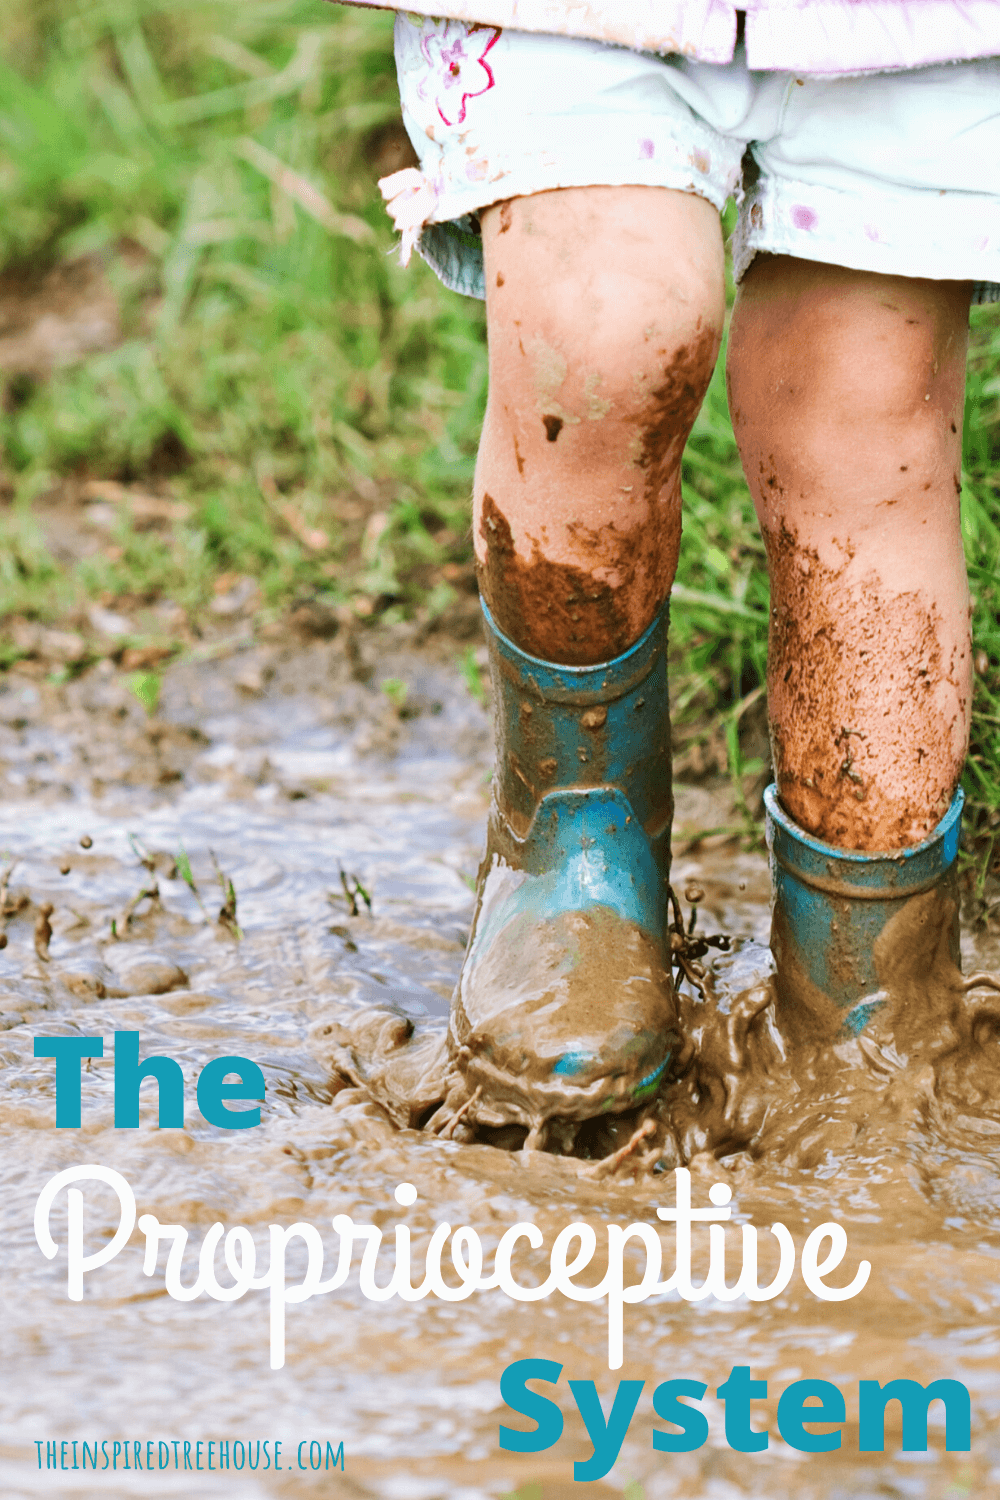 picture of child's feet in rain boots, stomping in a mud puddle with text that reads "The Proprioceptive System"